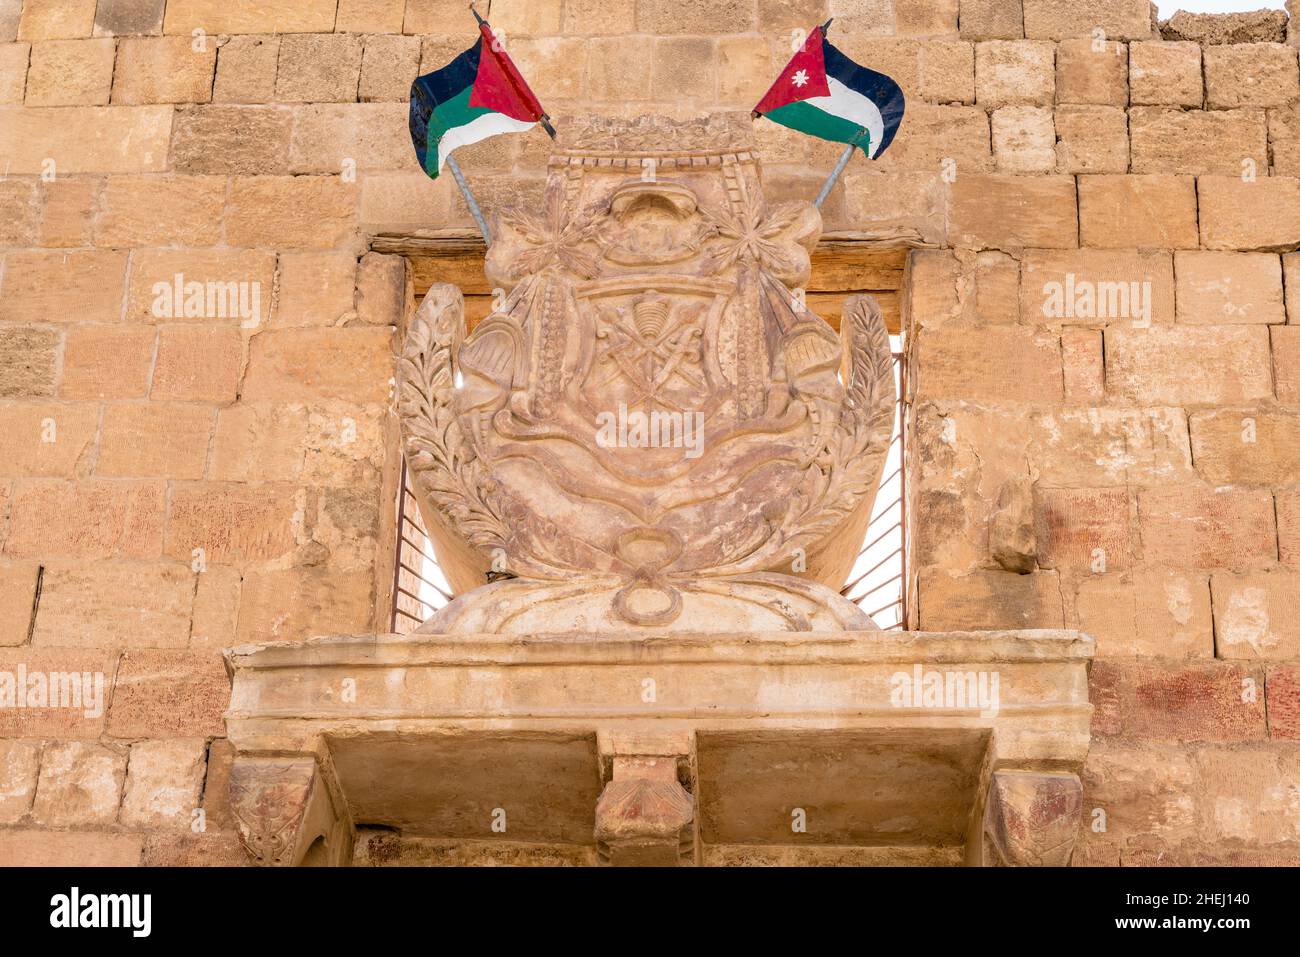 The Hashemite Coat Of Arms Above The Entrance To The Aqaba Fort, Aqaba, Aqaba Governorate, Jordan. Stock Photo